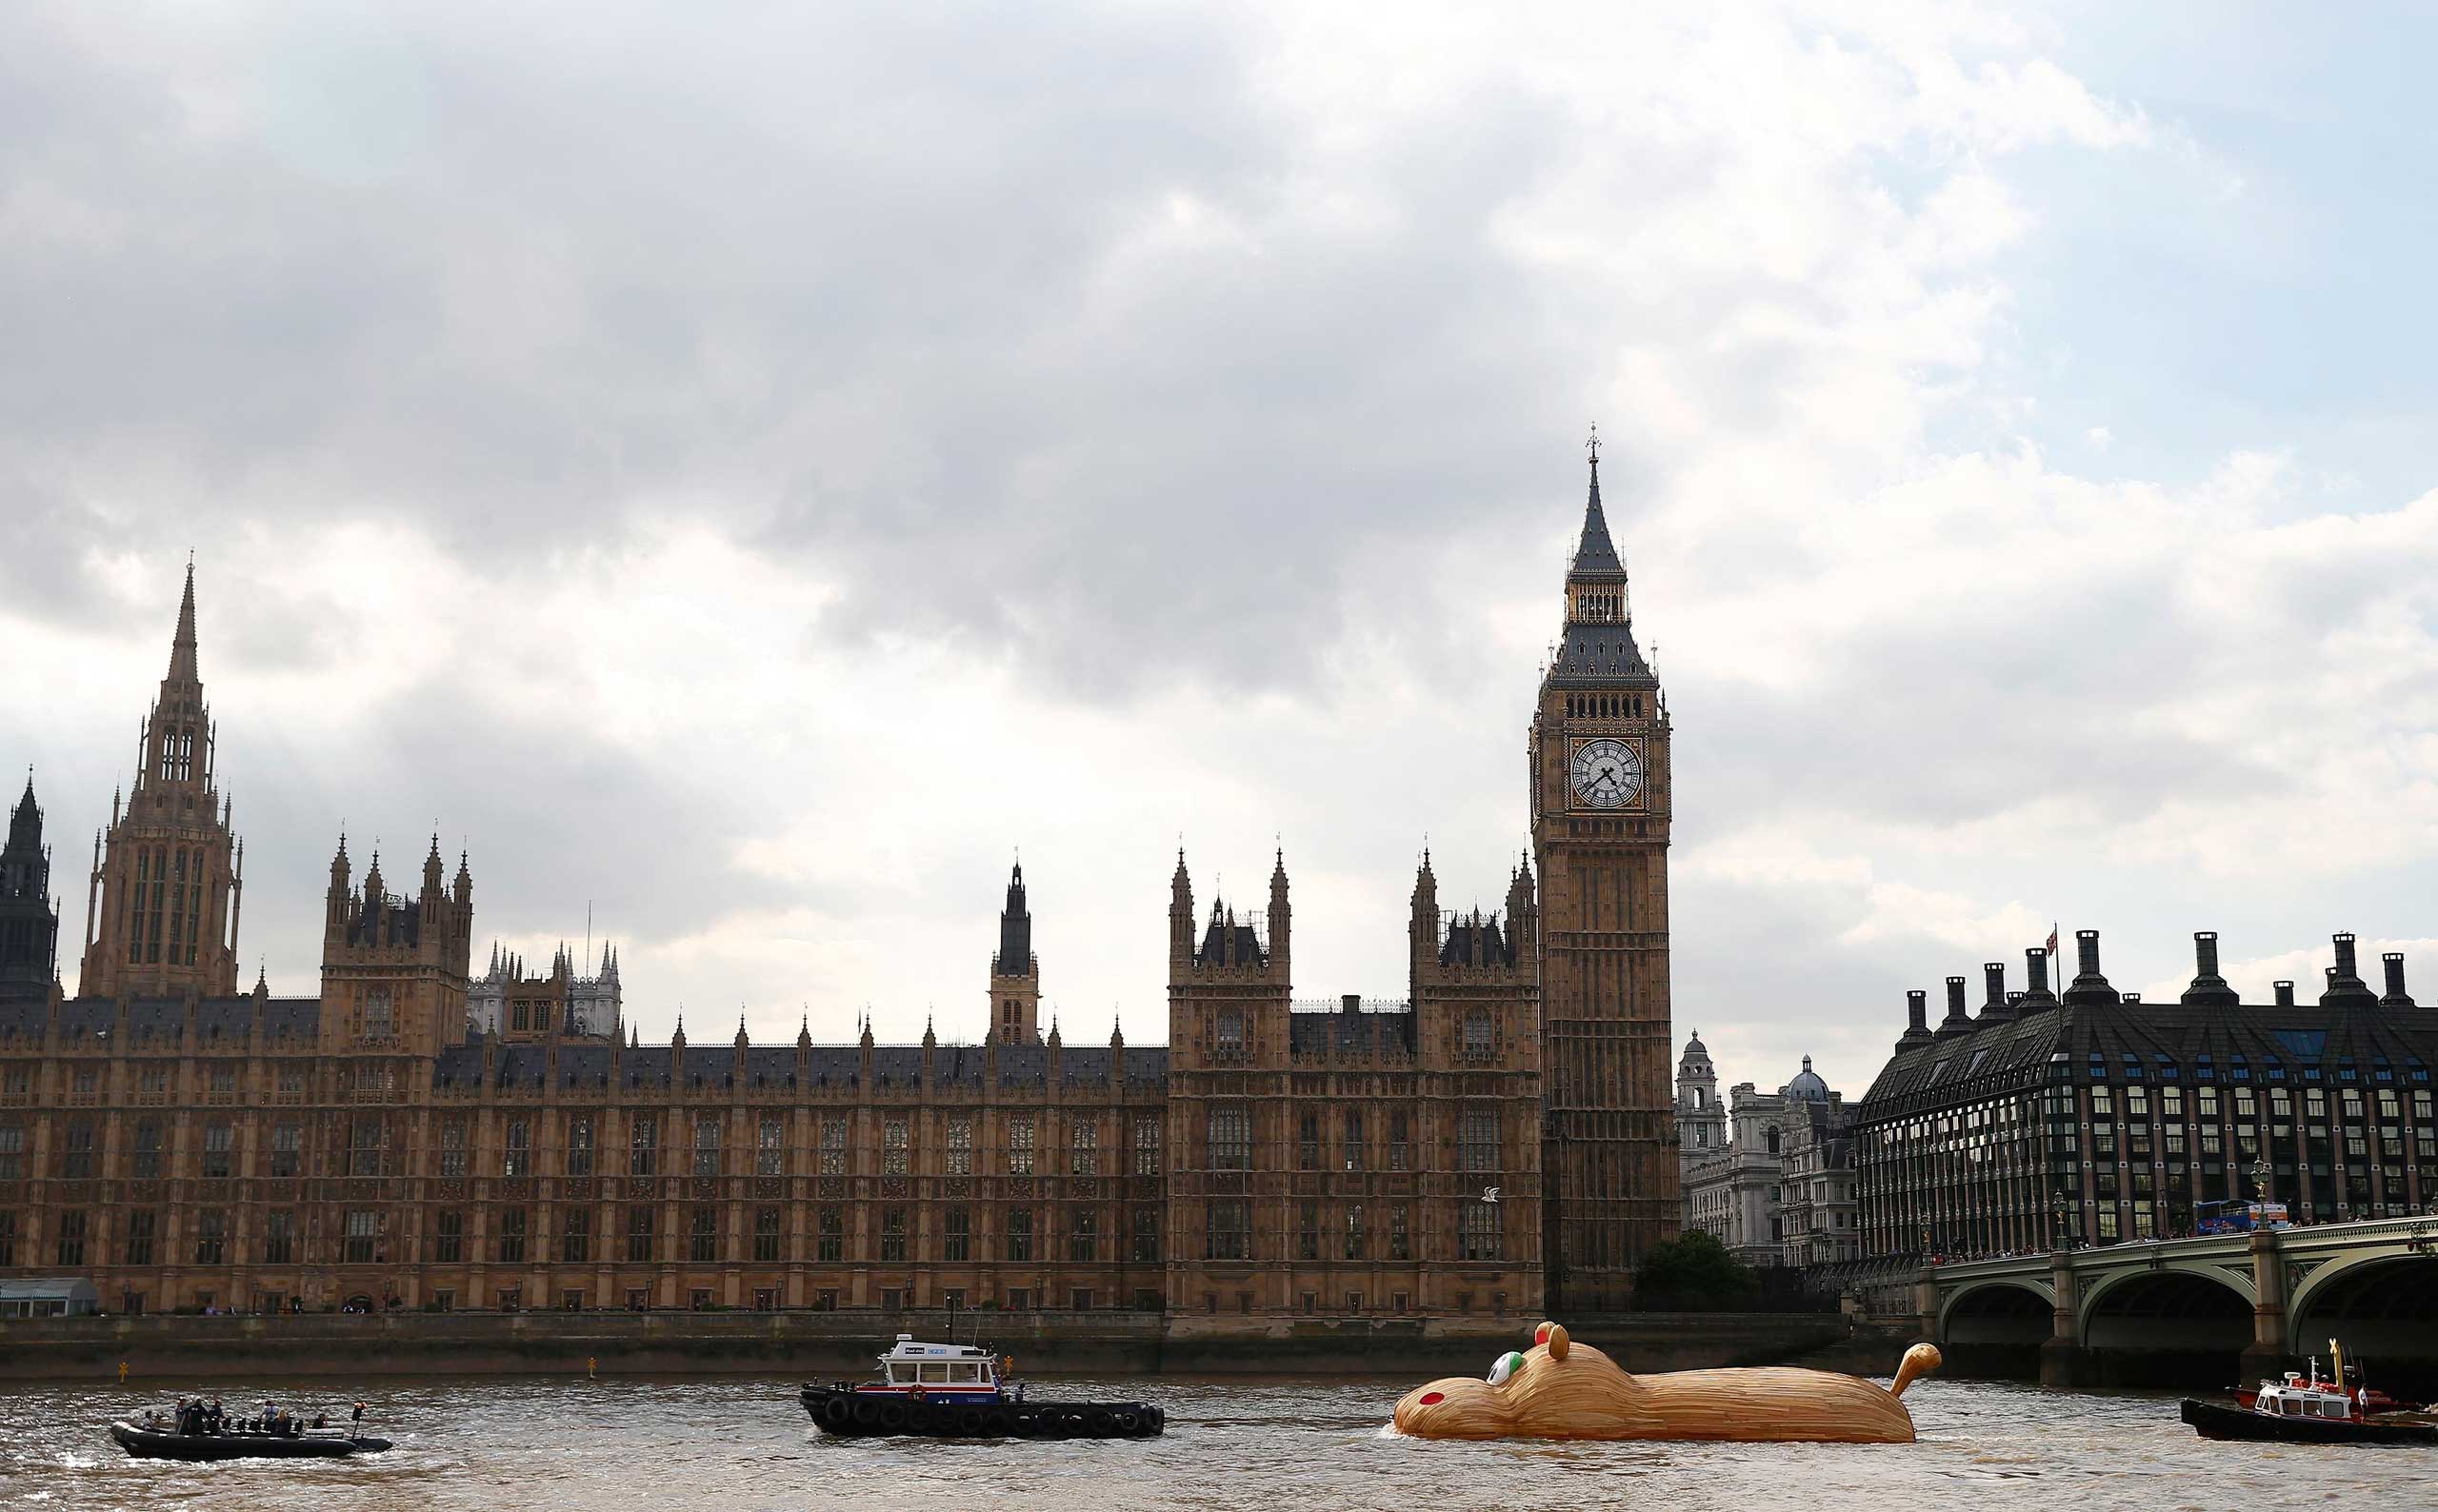 A sculpture of a giant hippopotamus built by artist Florentjin Hofman is towed up the Thames past the Houses of Parliament in central London, Sept. 2, 2014.